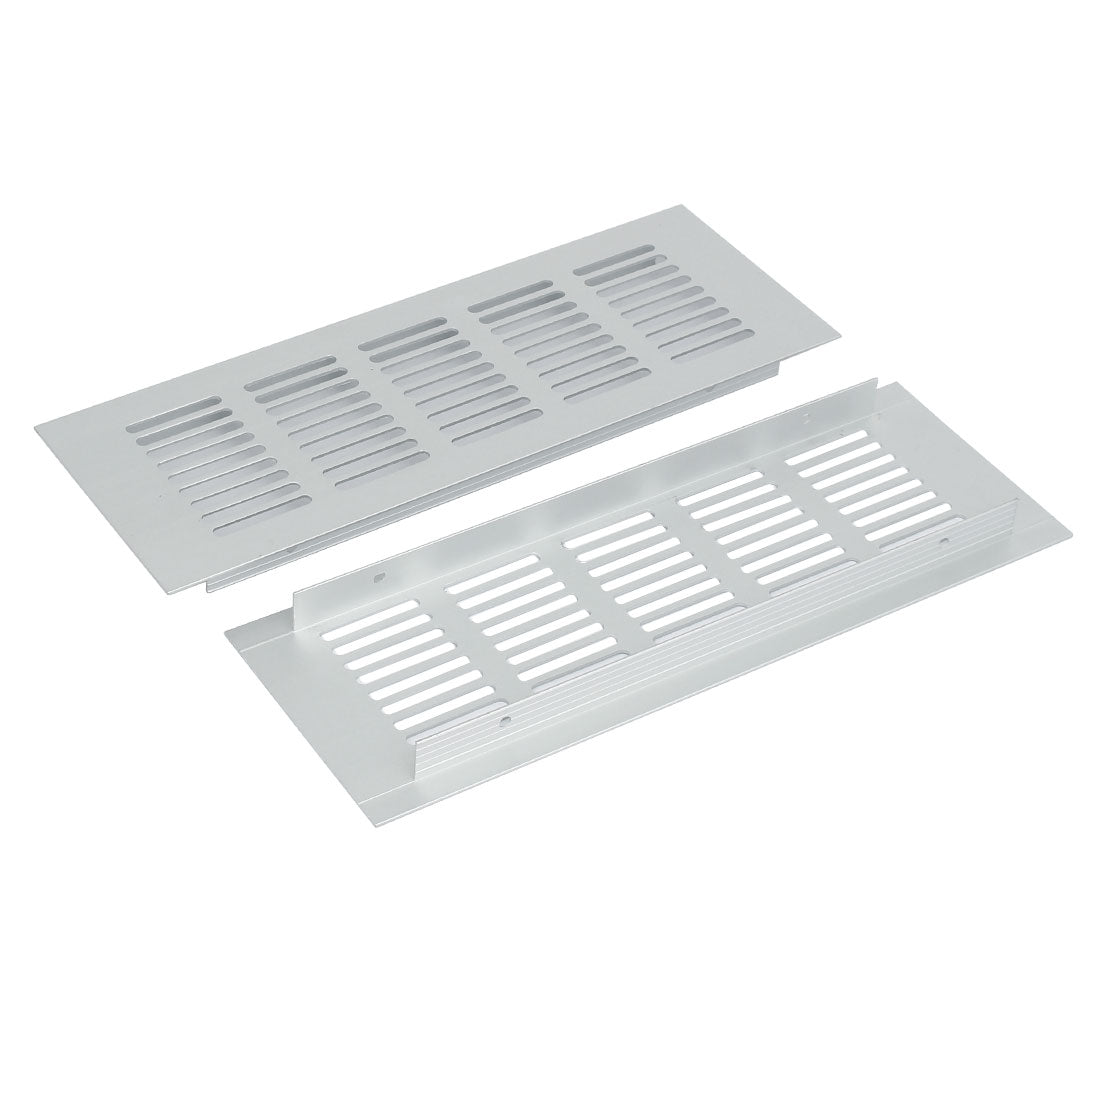 uxcell Uxcell Aluminum Alloy Air Vent Louvered Grill Cover Ventilation Grille 225mmx80mm 2pcs